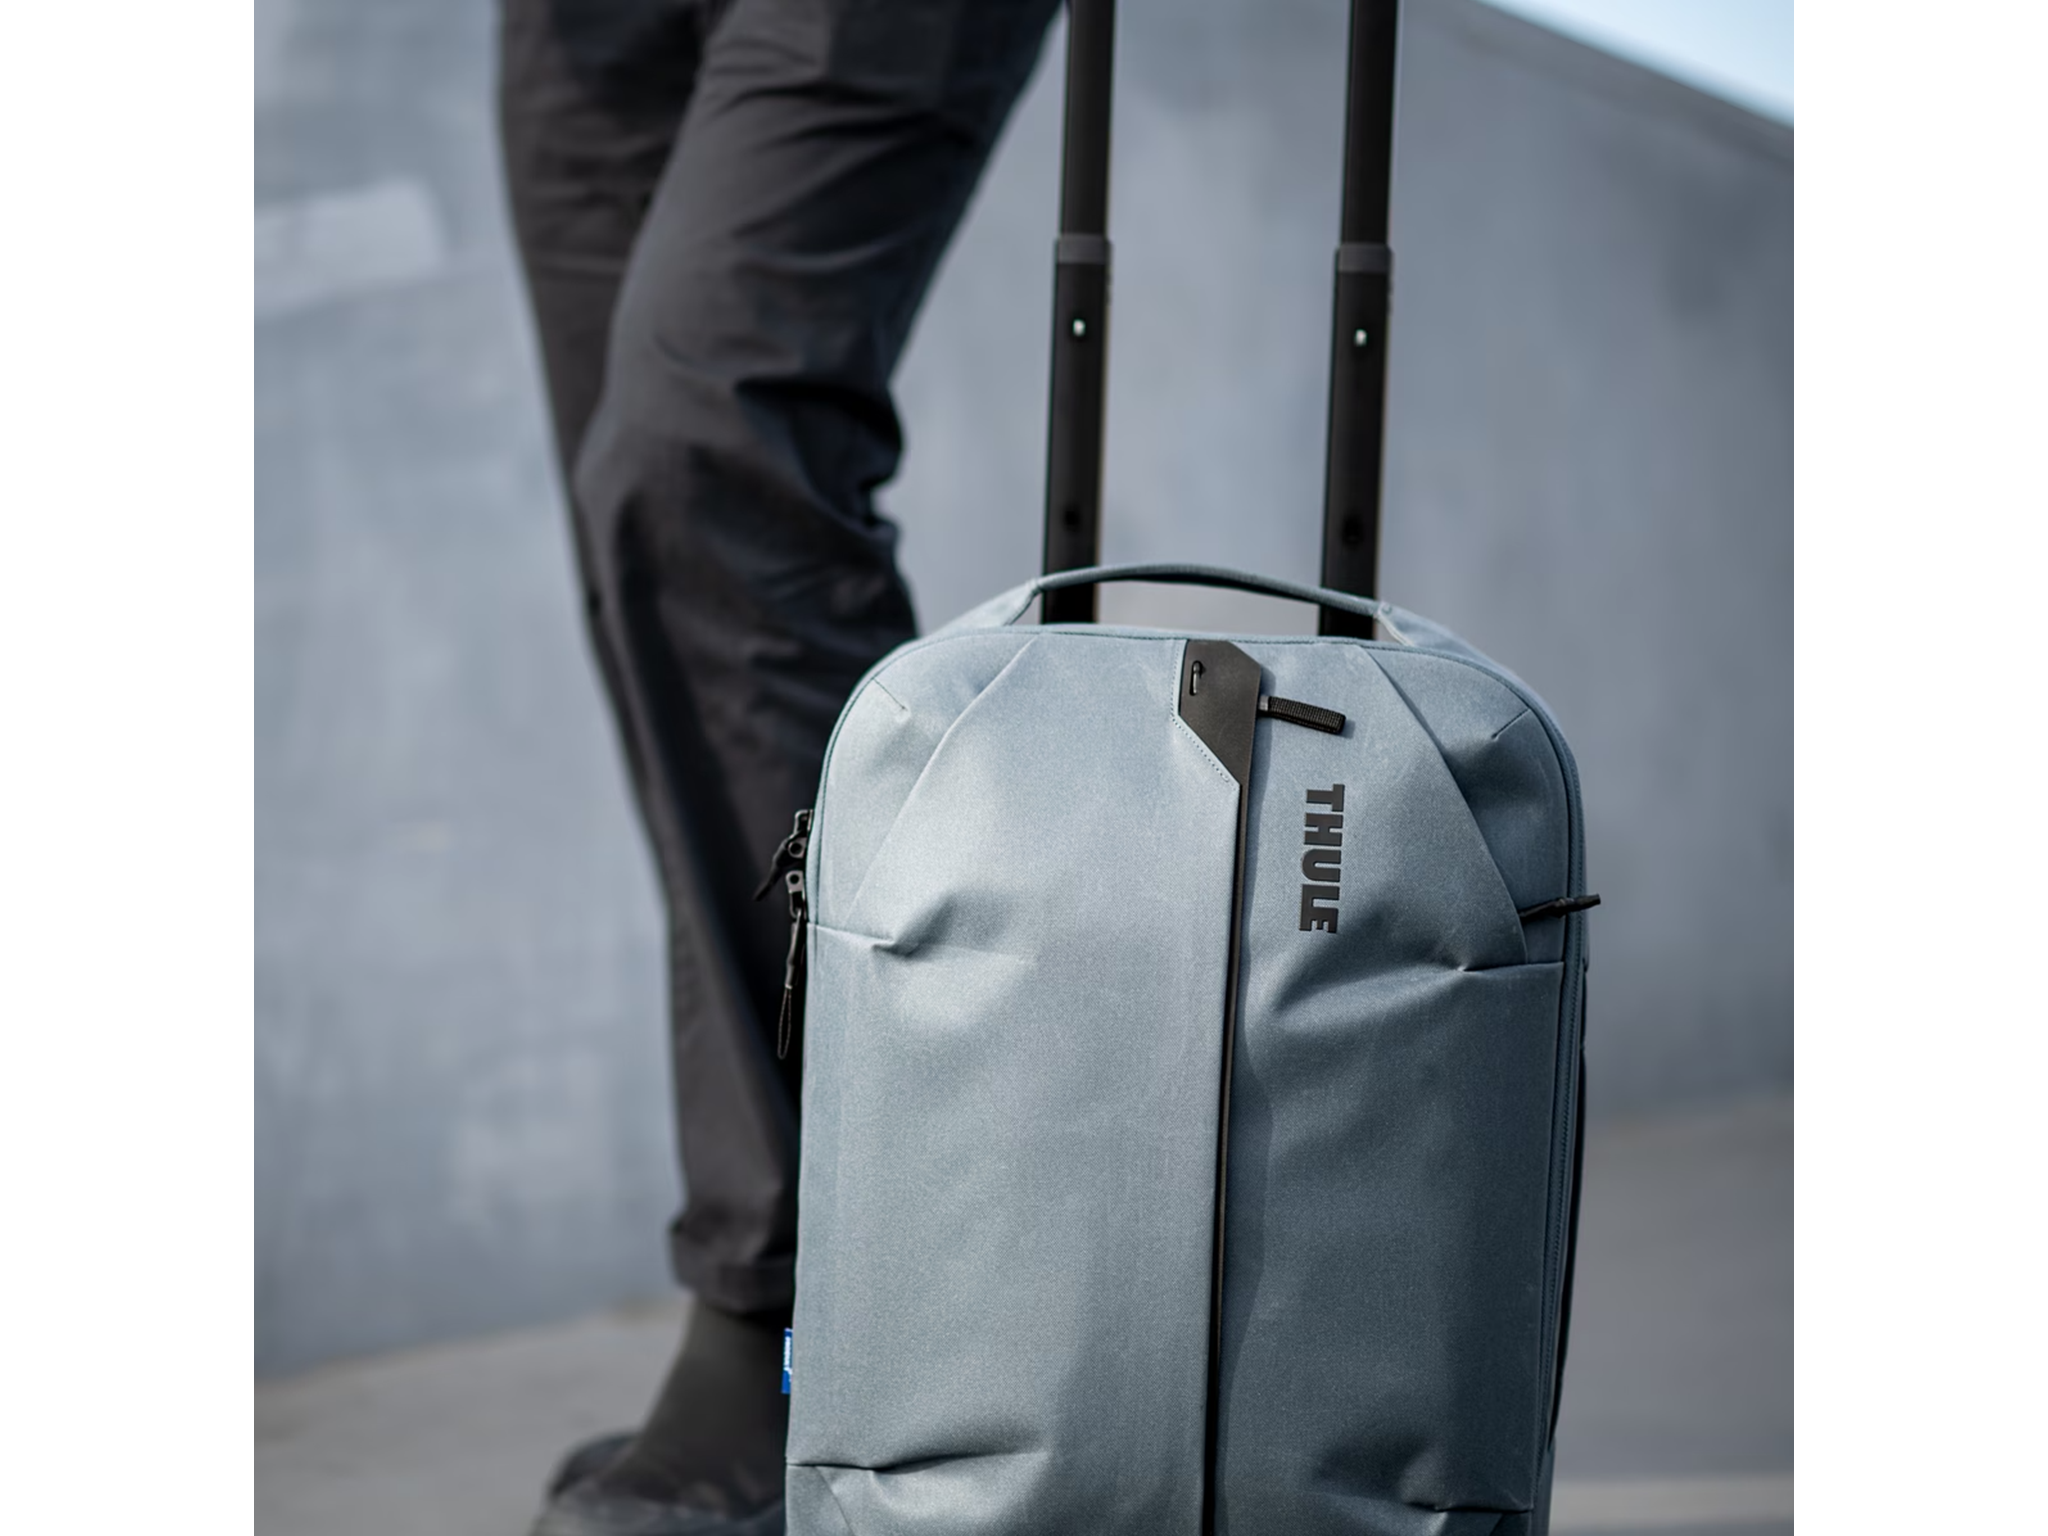 Sleek, minimalistic and utilitarian by design, you can trust Thule luggage